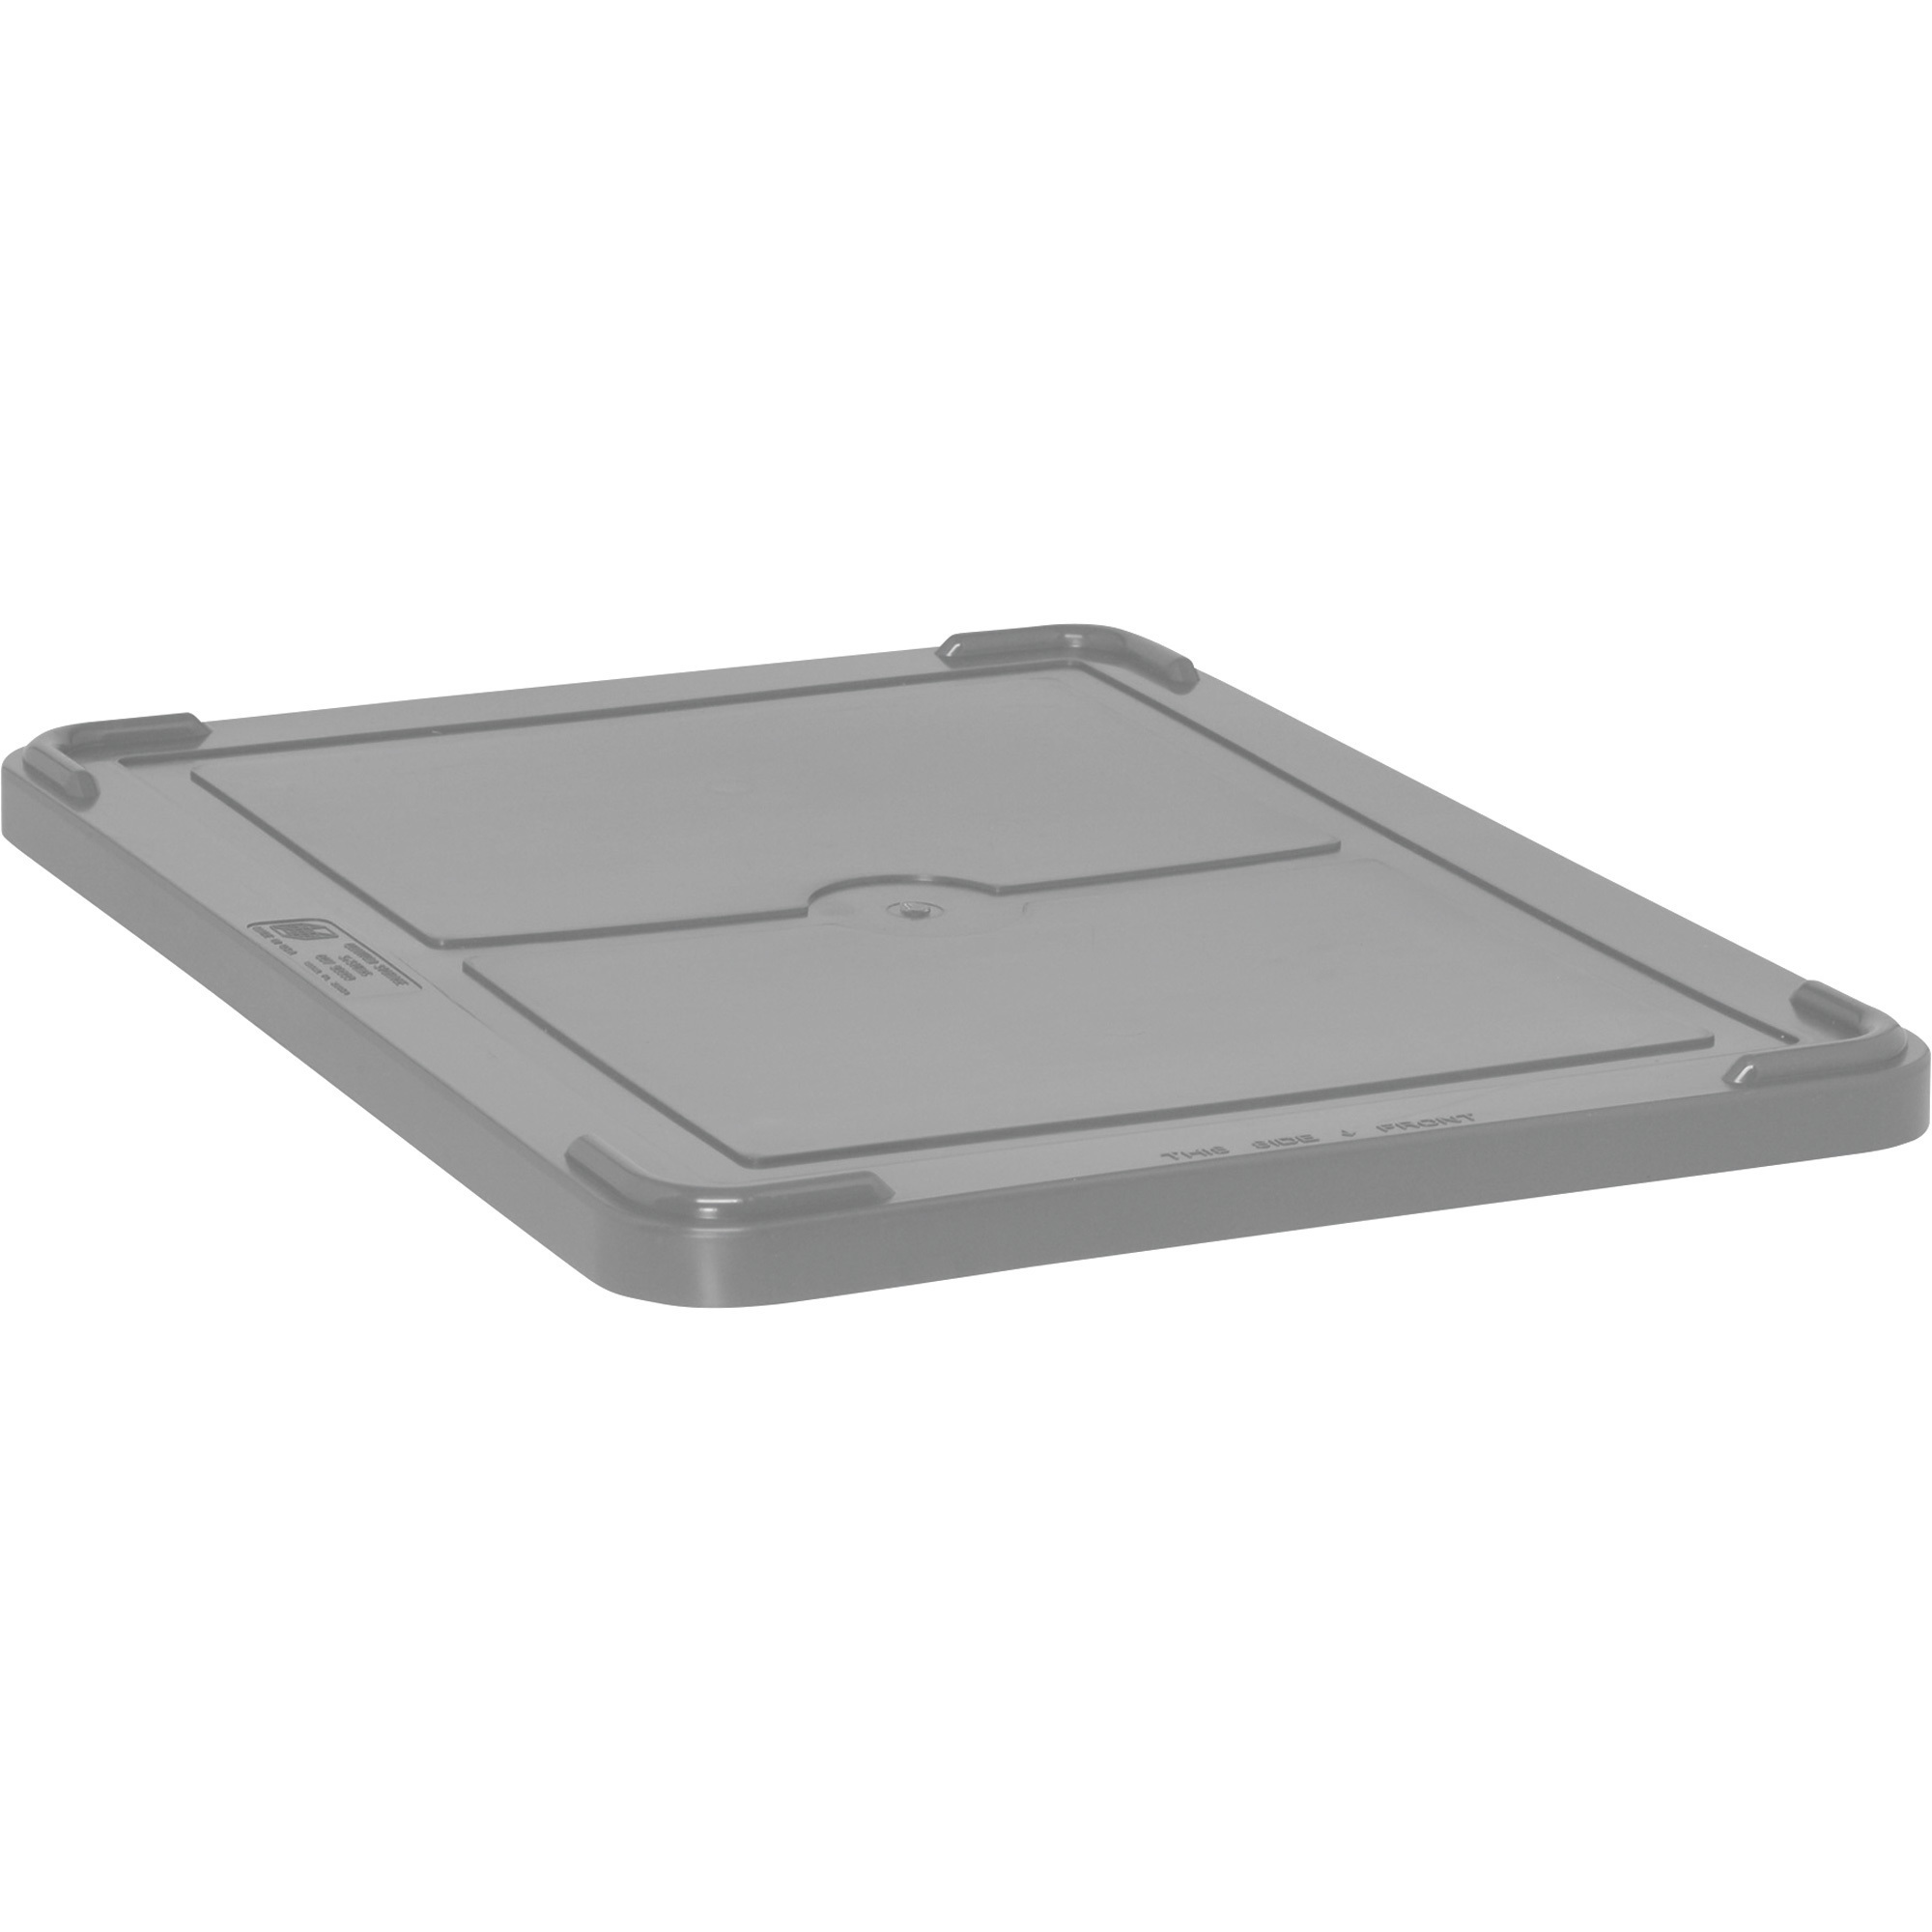 Quantum Covers for Dividable Grid Container, 3-Pack, 22 1/2Inch W x 17 1/2Inch D x 1Inch H, Gray, Fits Item# 275604, Model COV93000GYCS